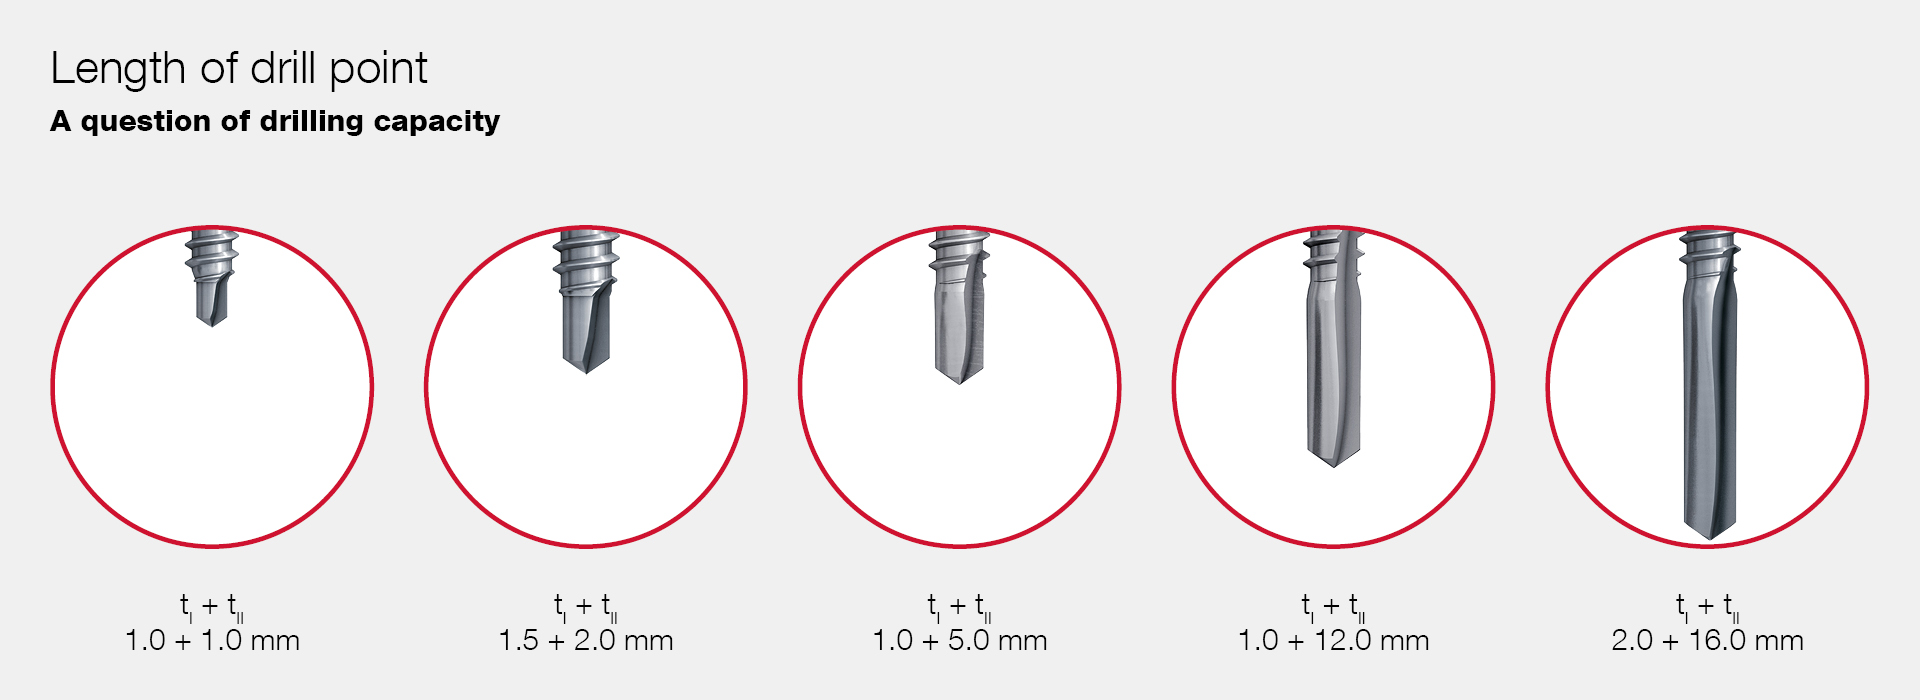 Length of drill point